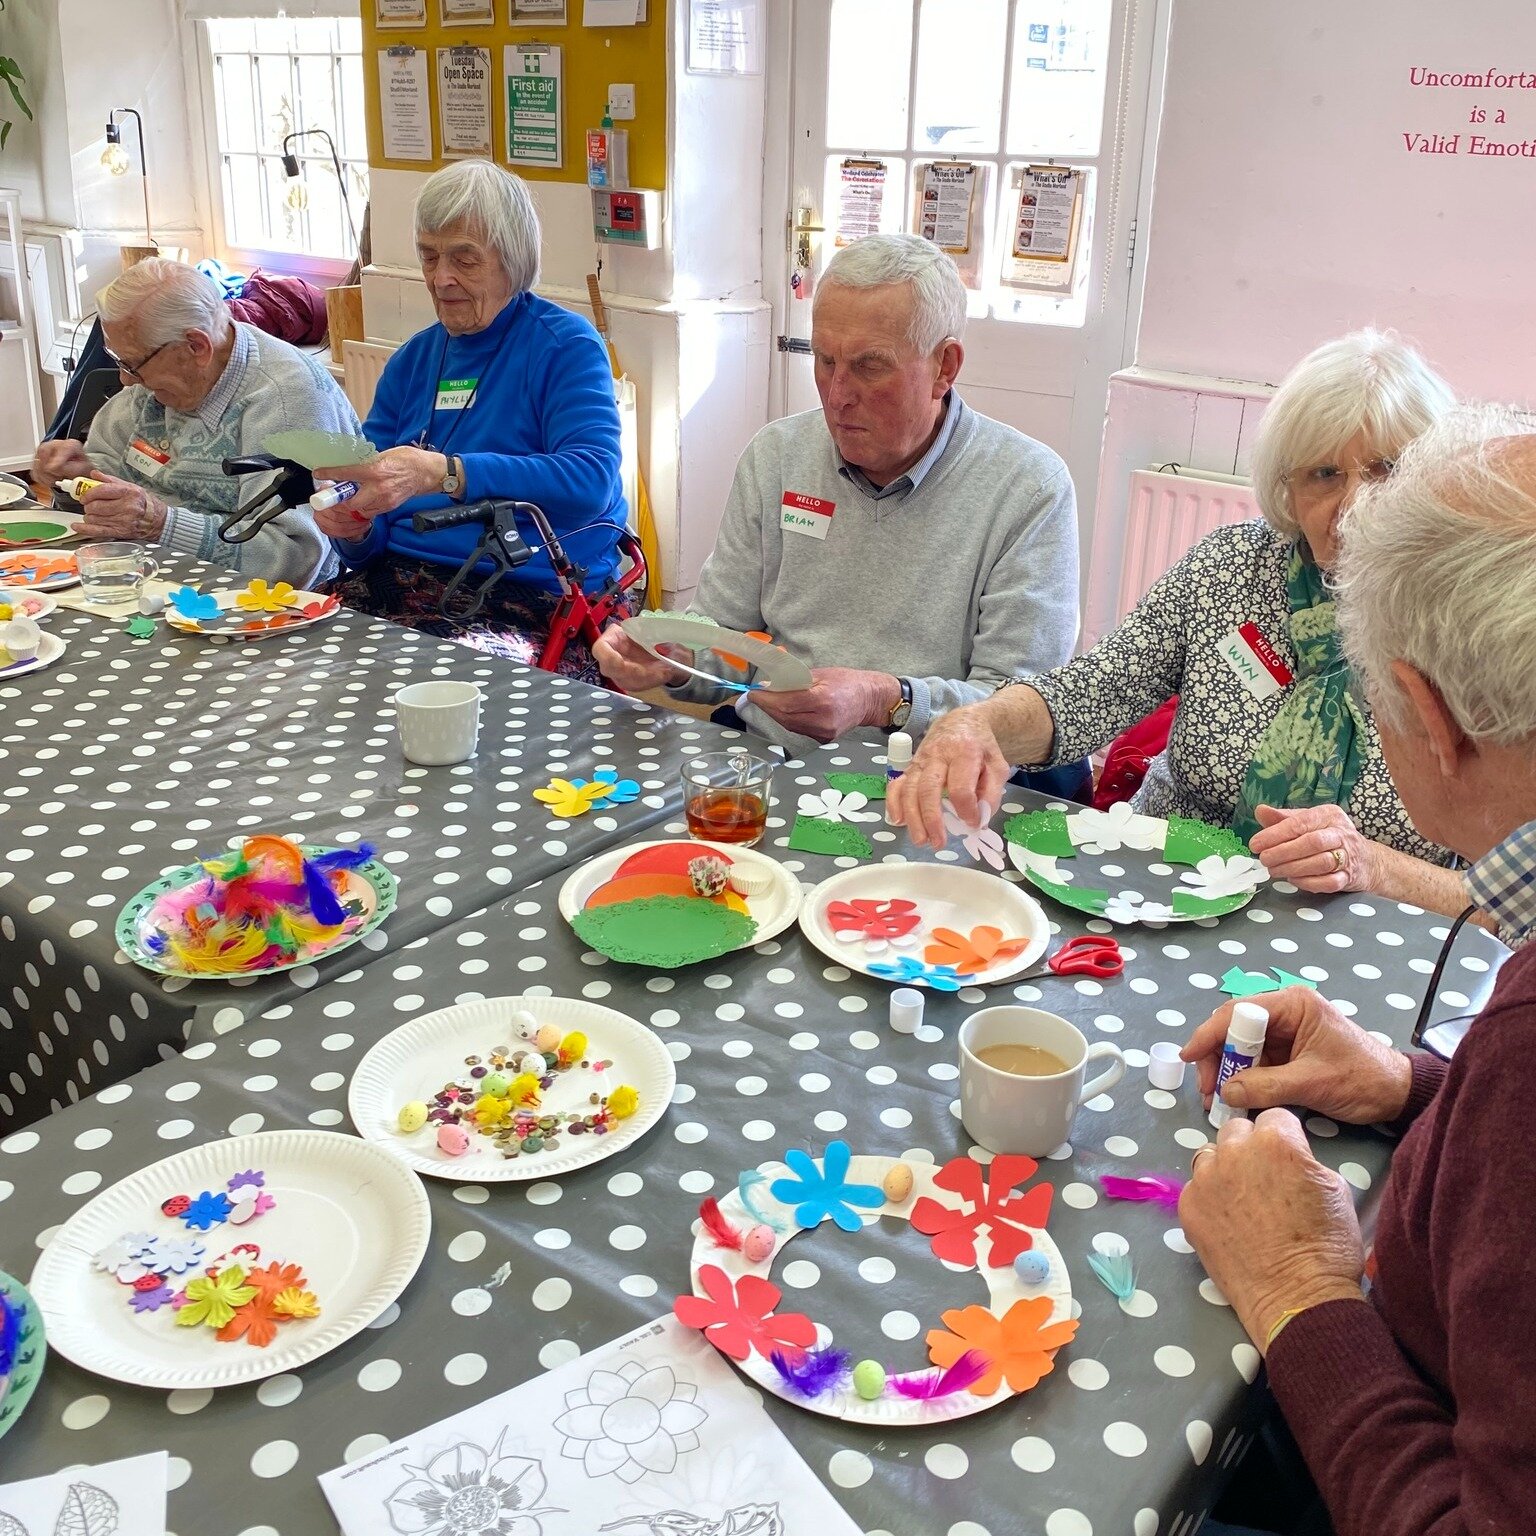 Our Creative Cuppa members had a great time at their March session at the Studio making Spring Wreaths with Mark and Ang. Thank you to @tnlcommunityfund for supporting our Creative Cuppa group 😊 

#CreativeCuppa #Dementia #AgingWell #CreativeActivit